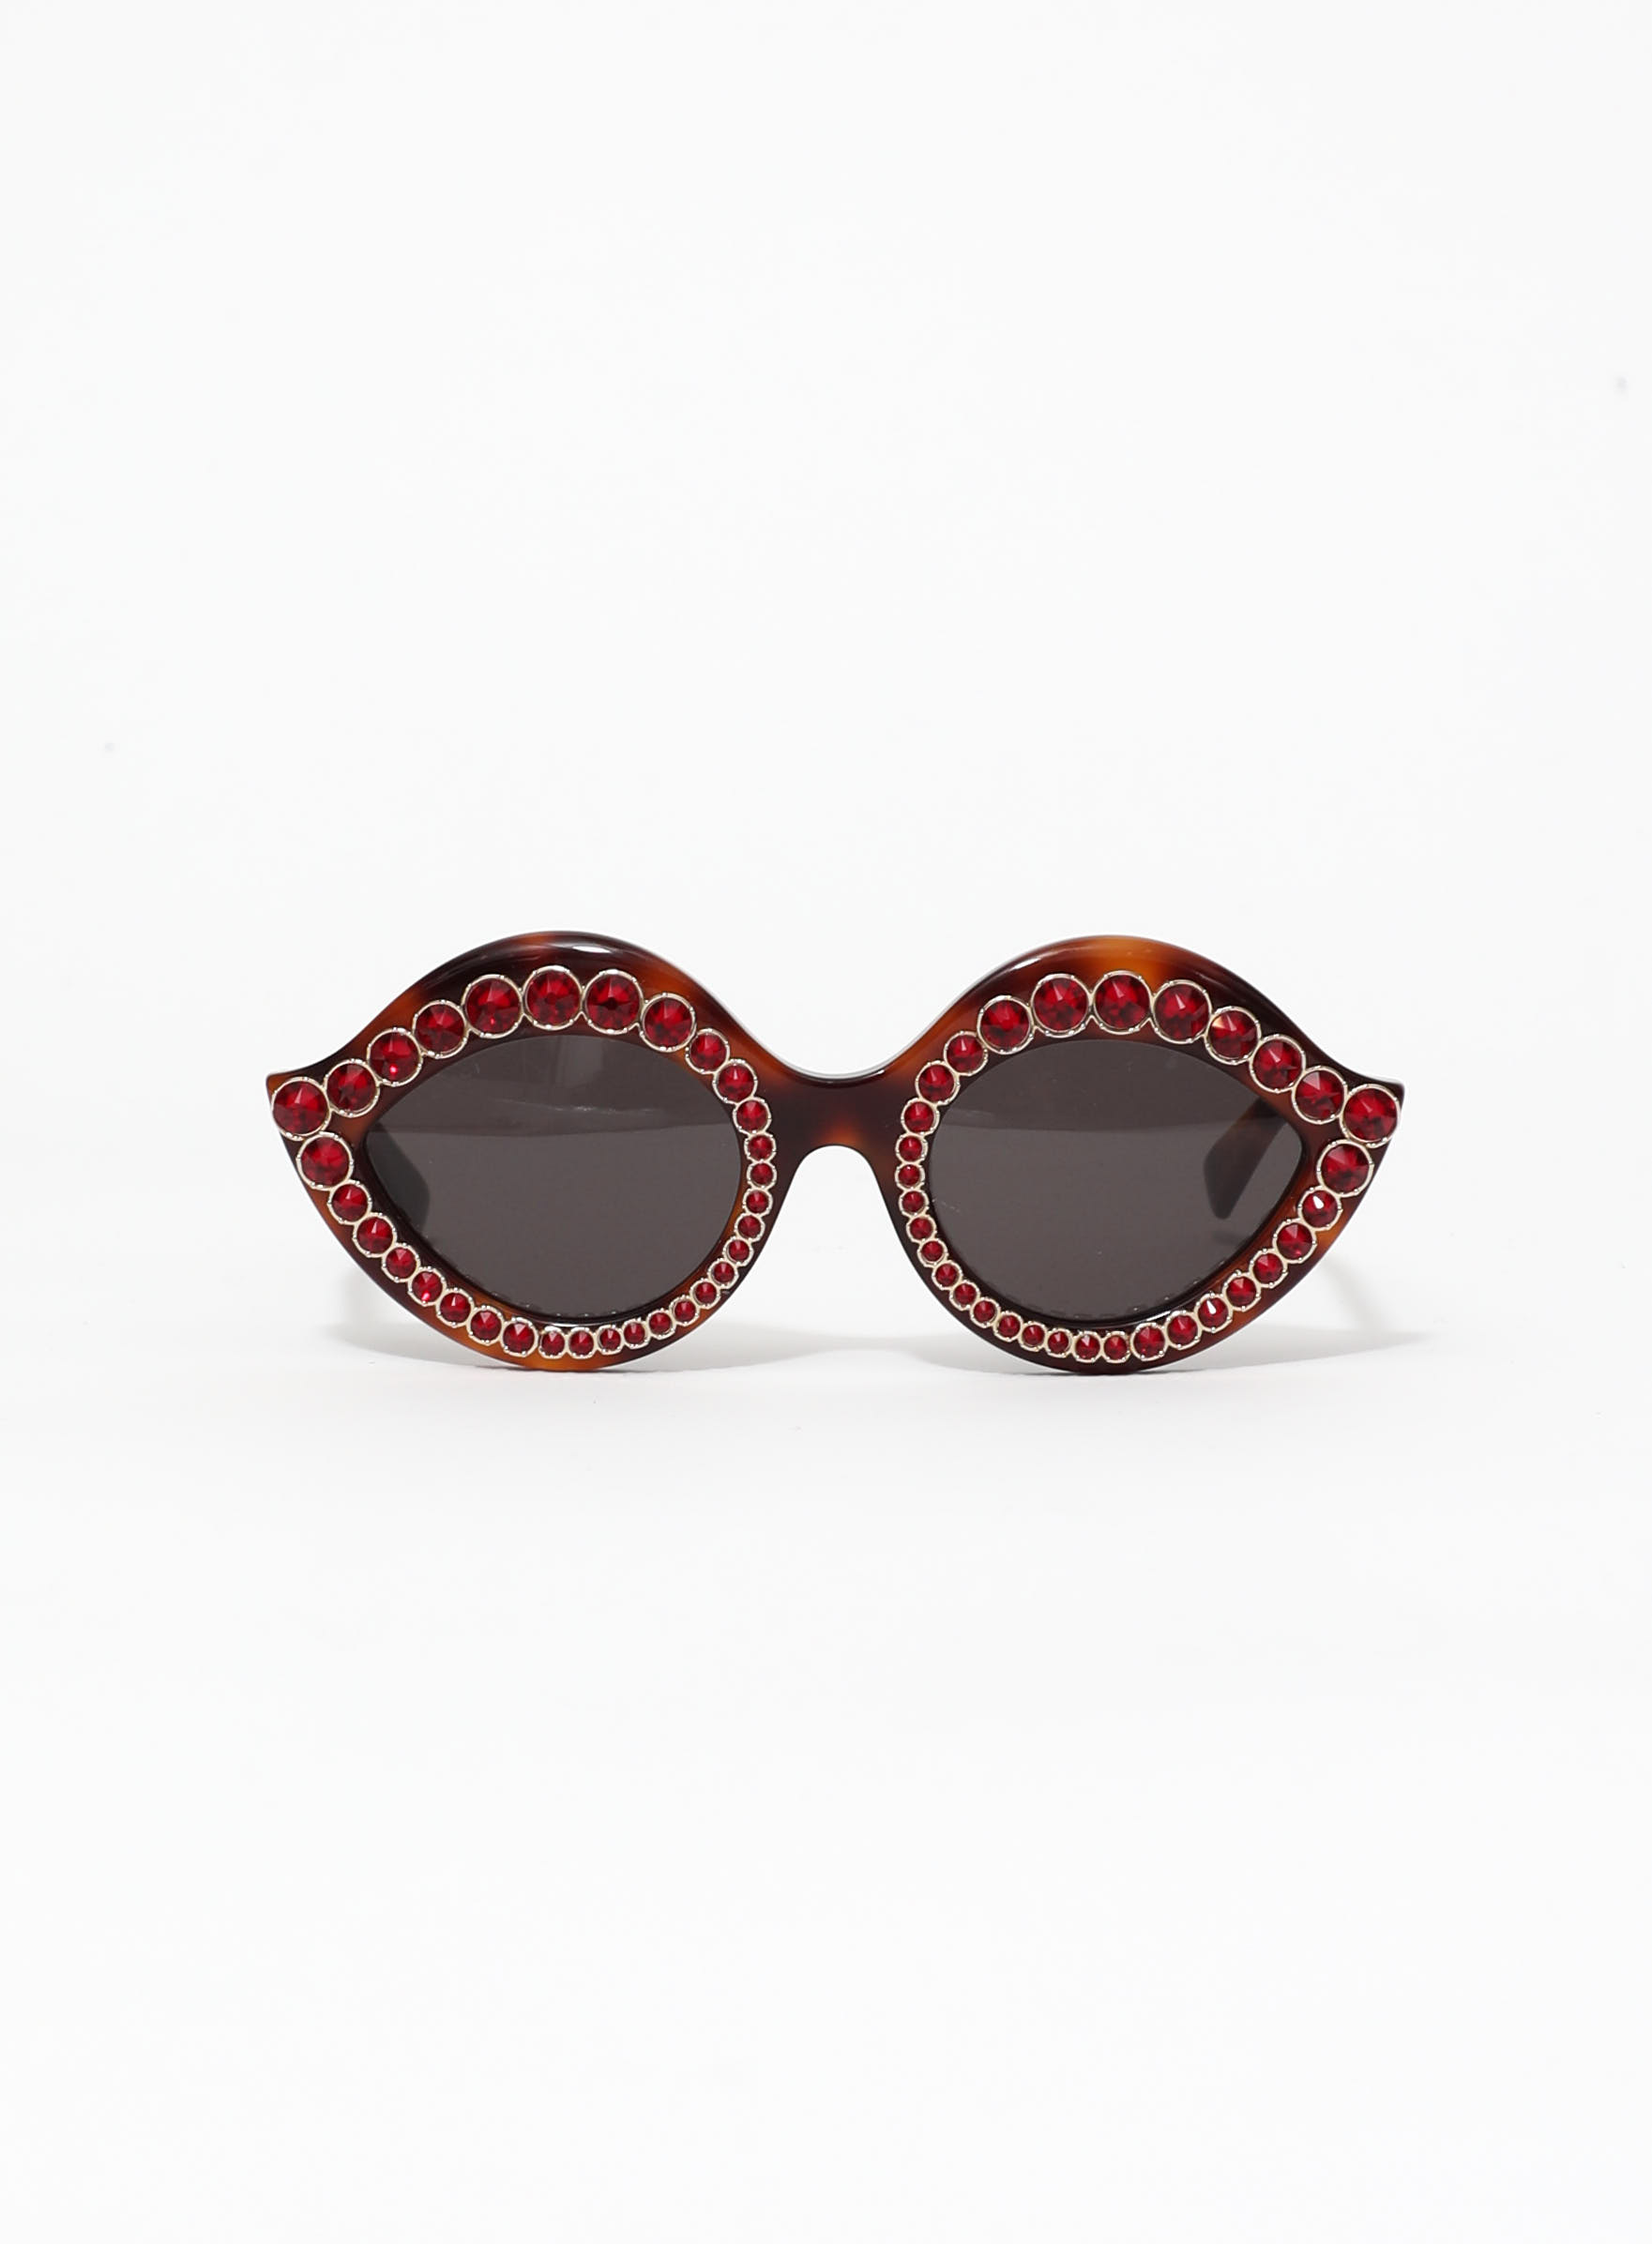 Gucci 52MM Cat Eye Sunglasses With Detachable Charm on SALE